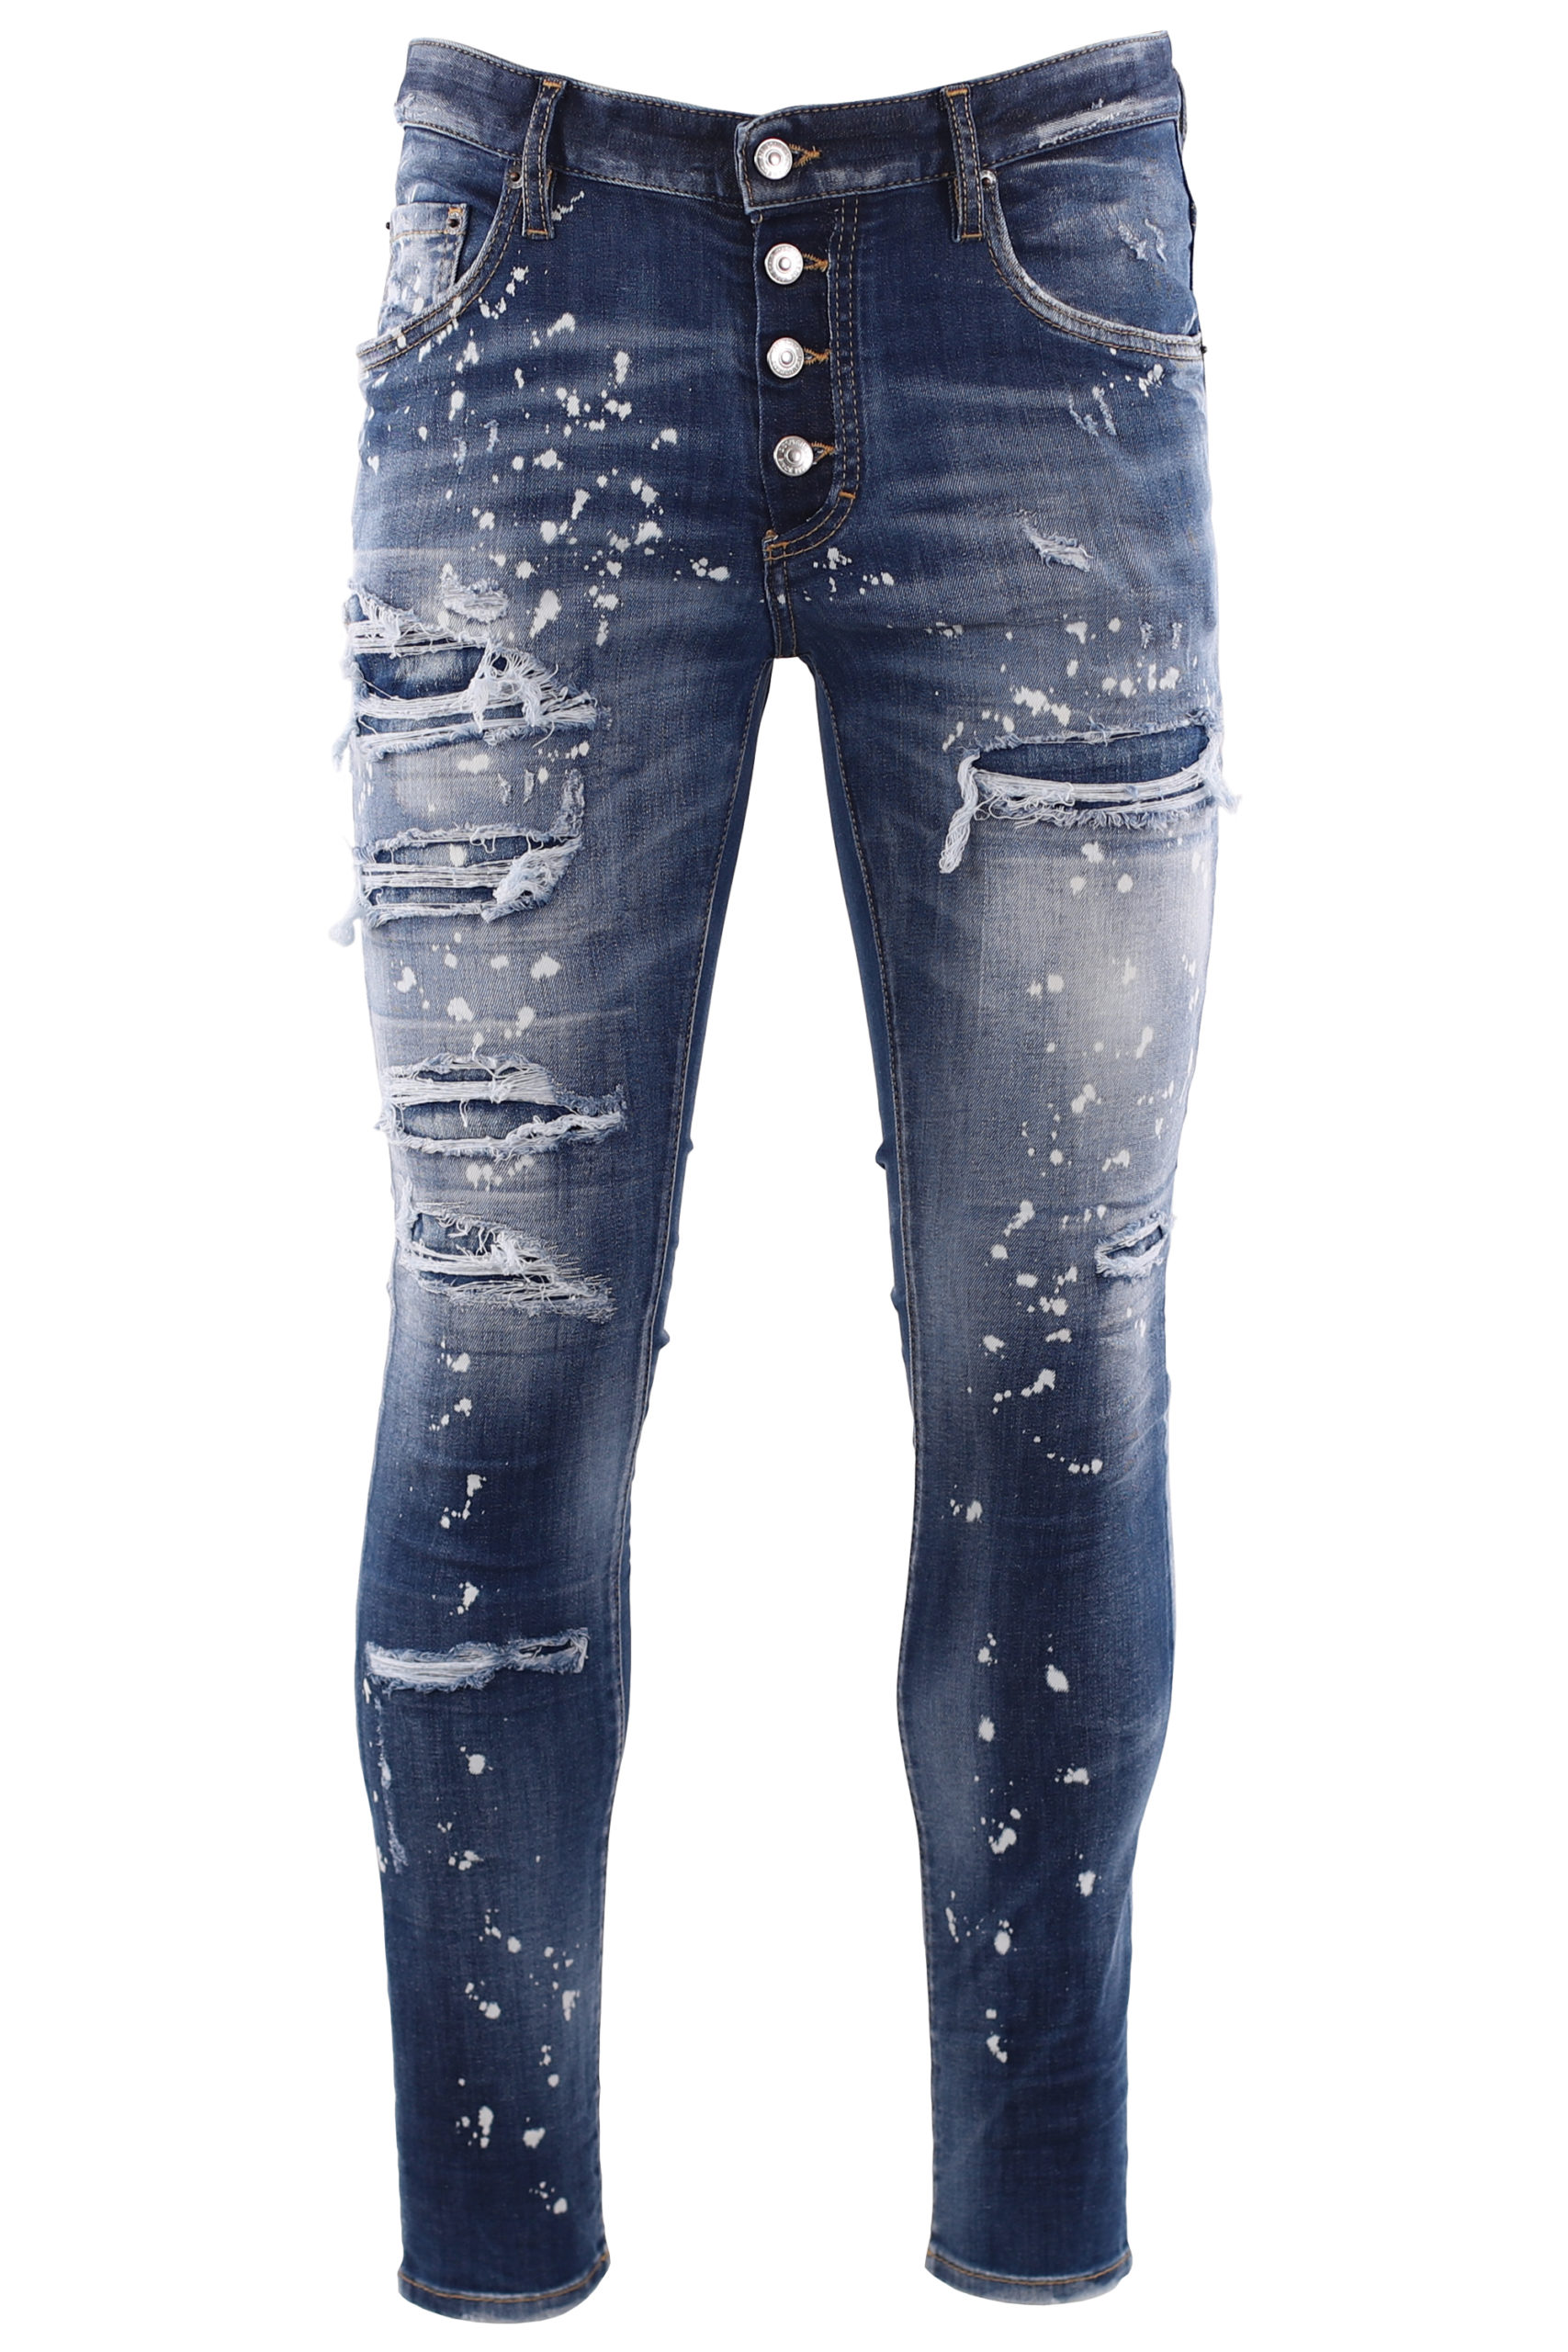 Dsquared2 - Super twinky blue denim jeans with white paint - BLS 